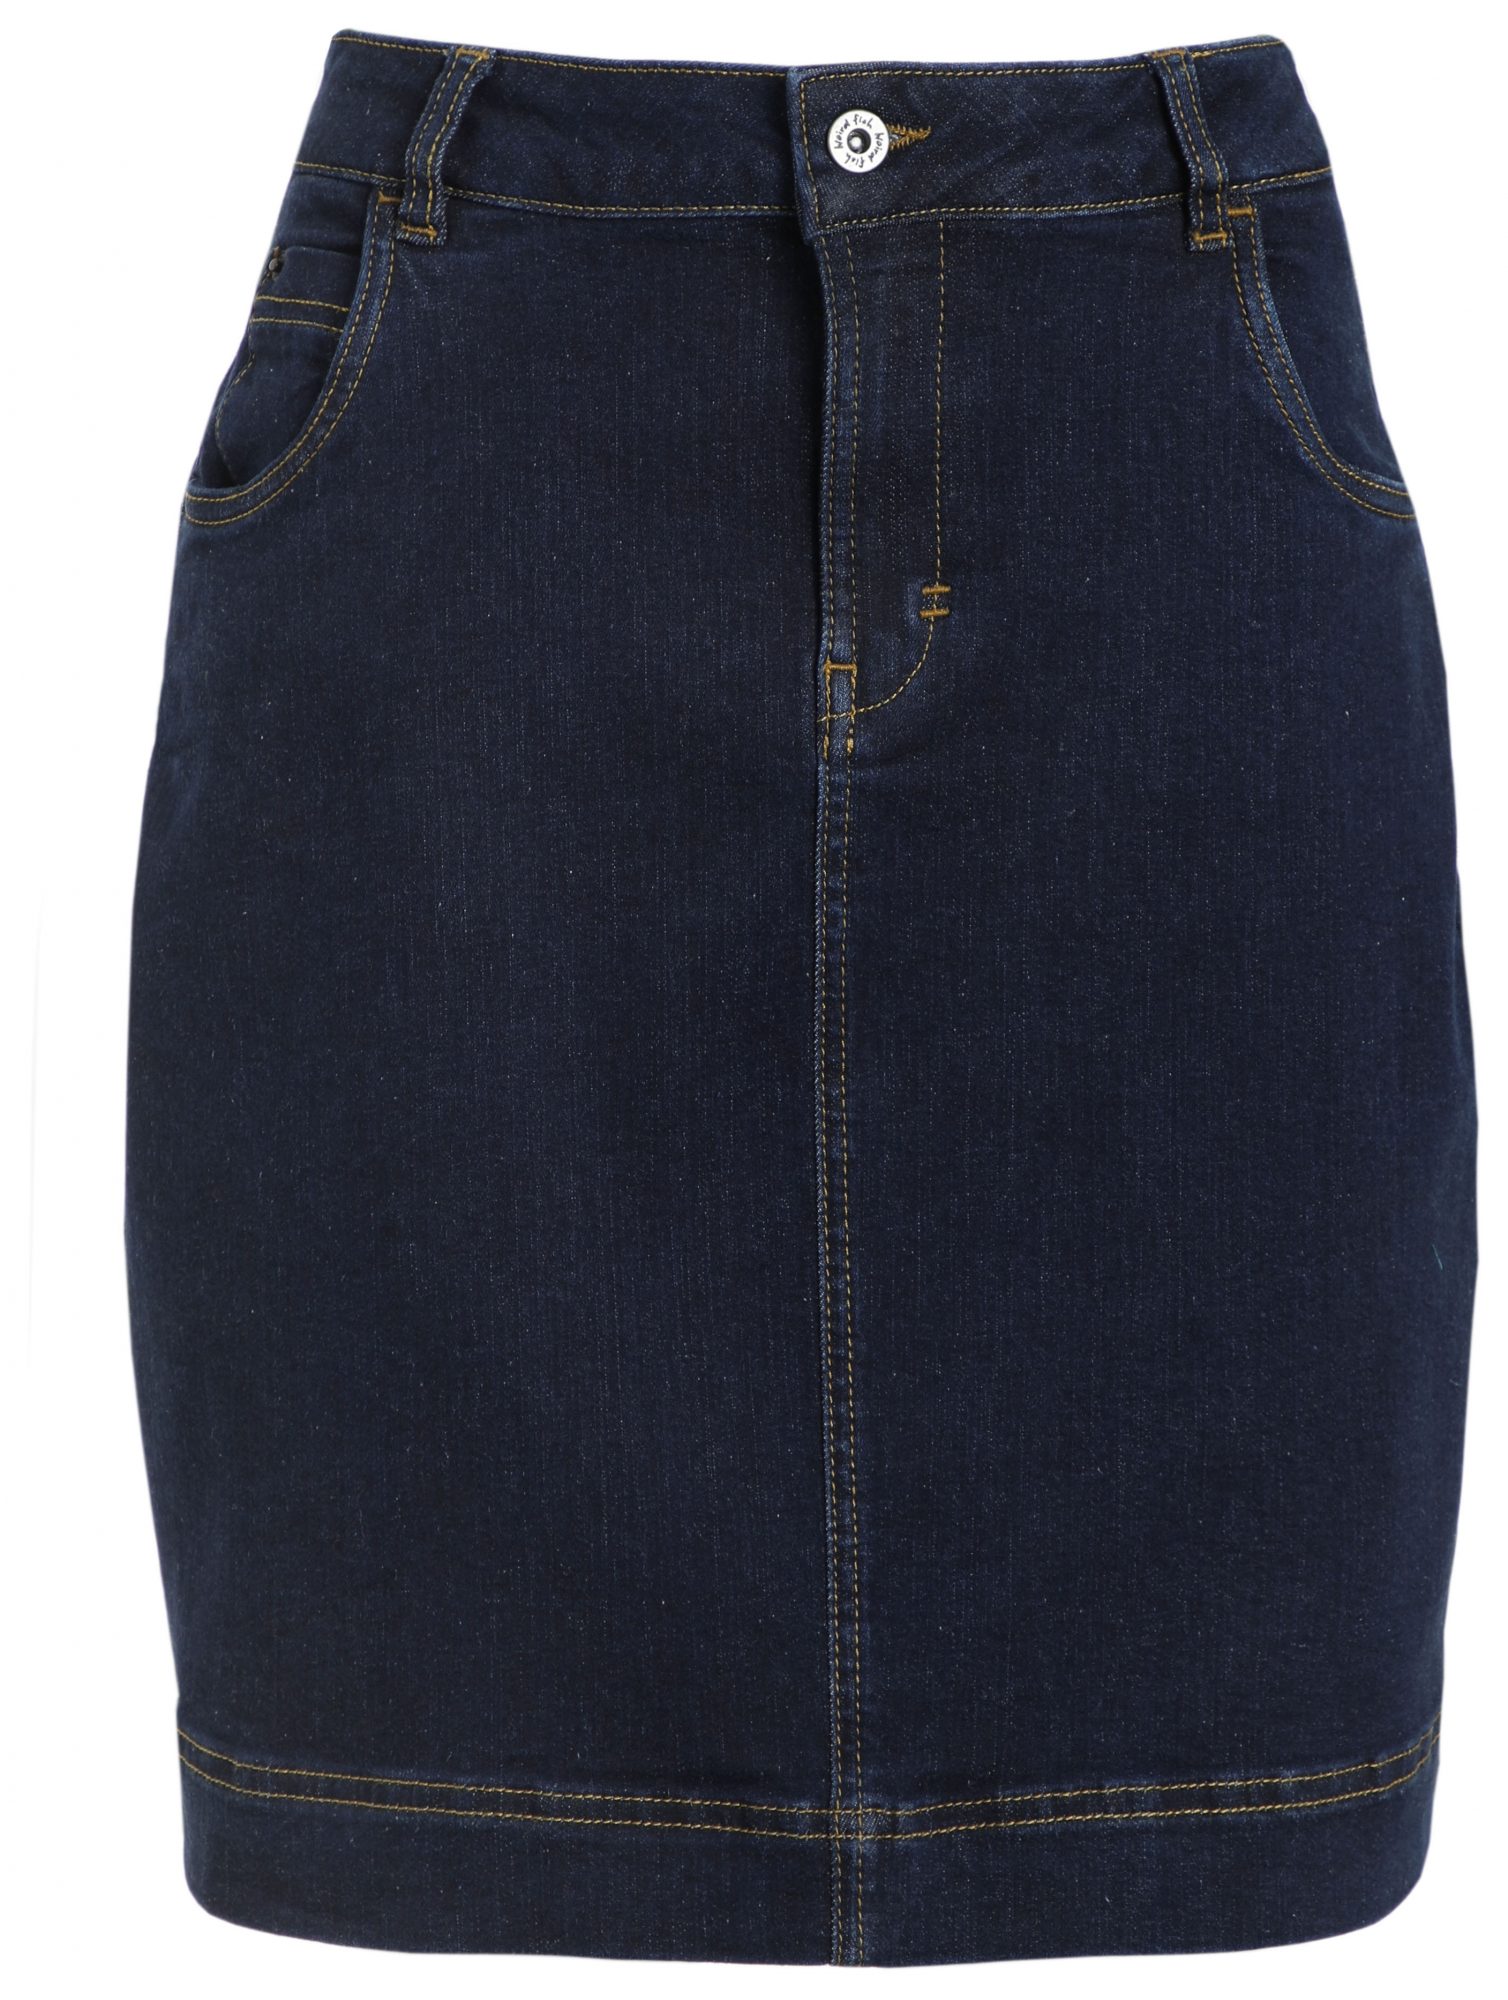 Low Rider Jean Skirt - Charcoal